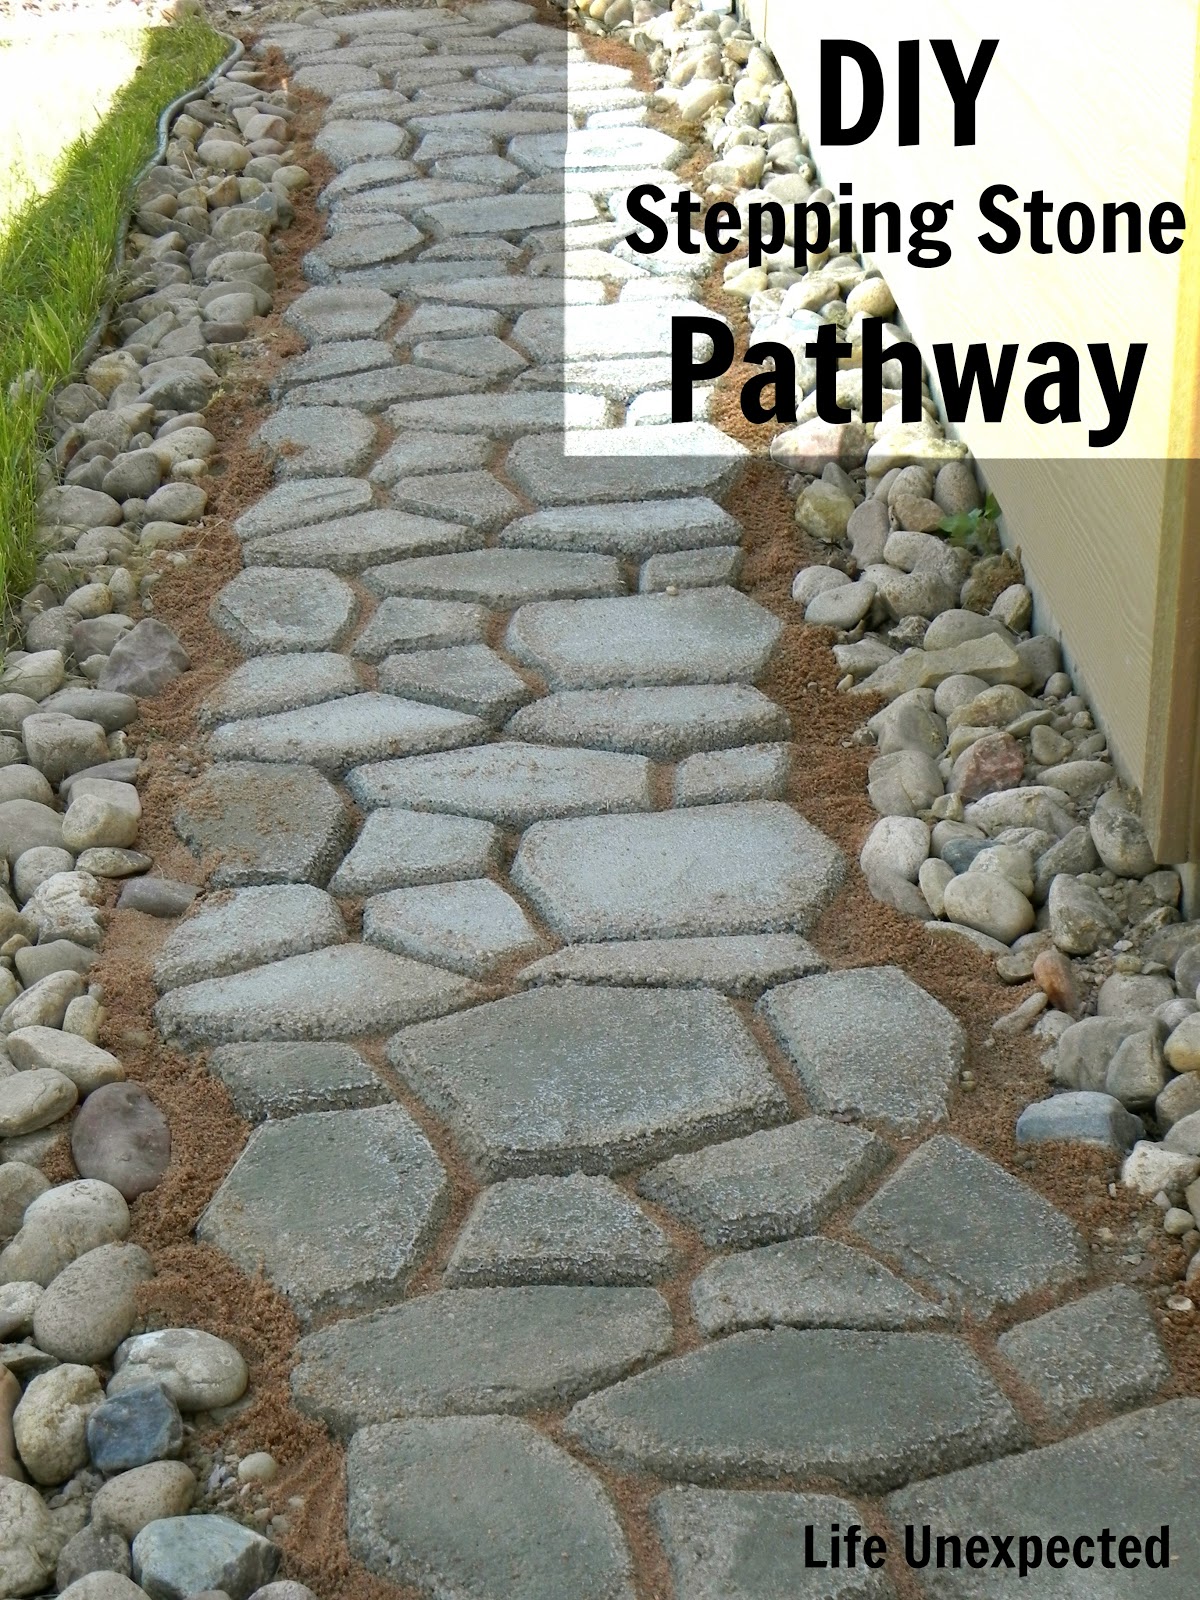 Life Unexpected: DIY Stepping Stone Pathway